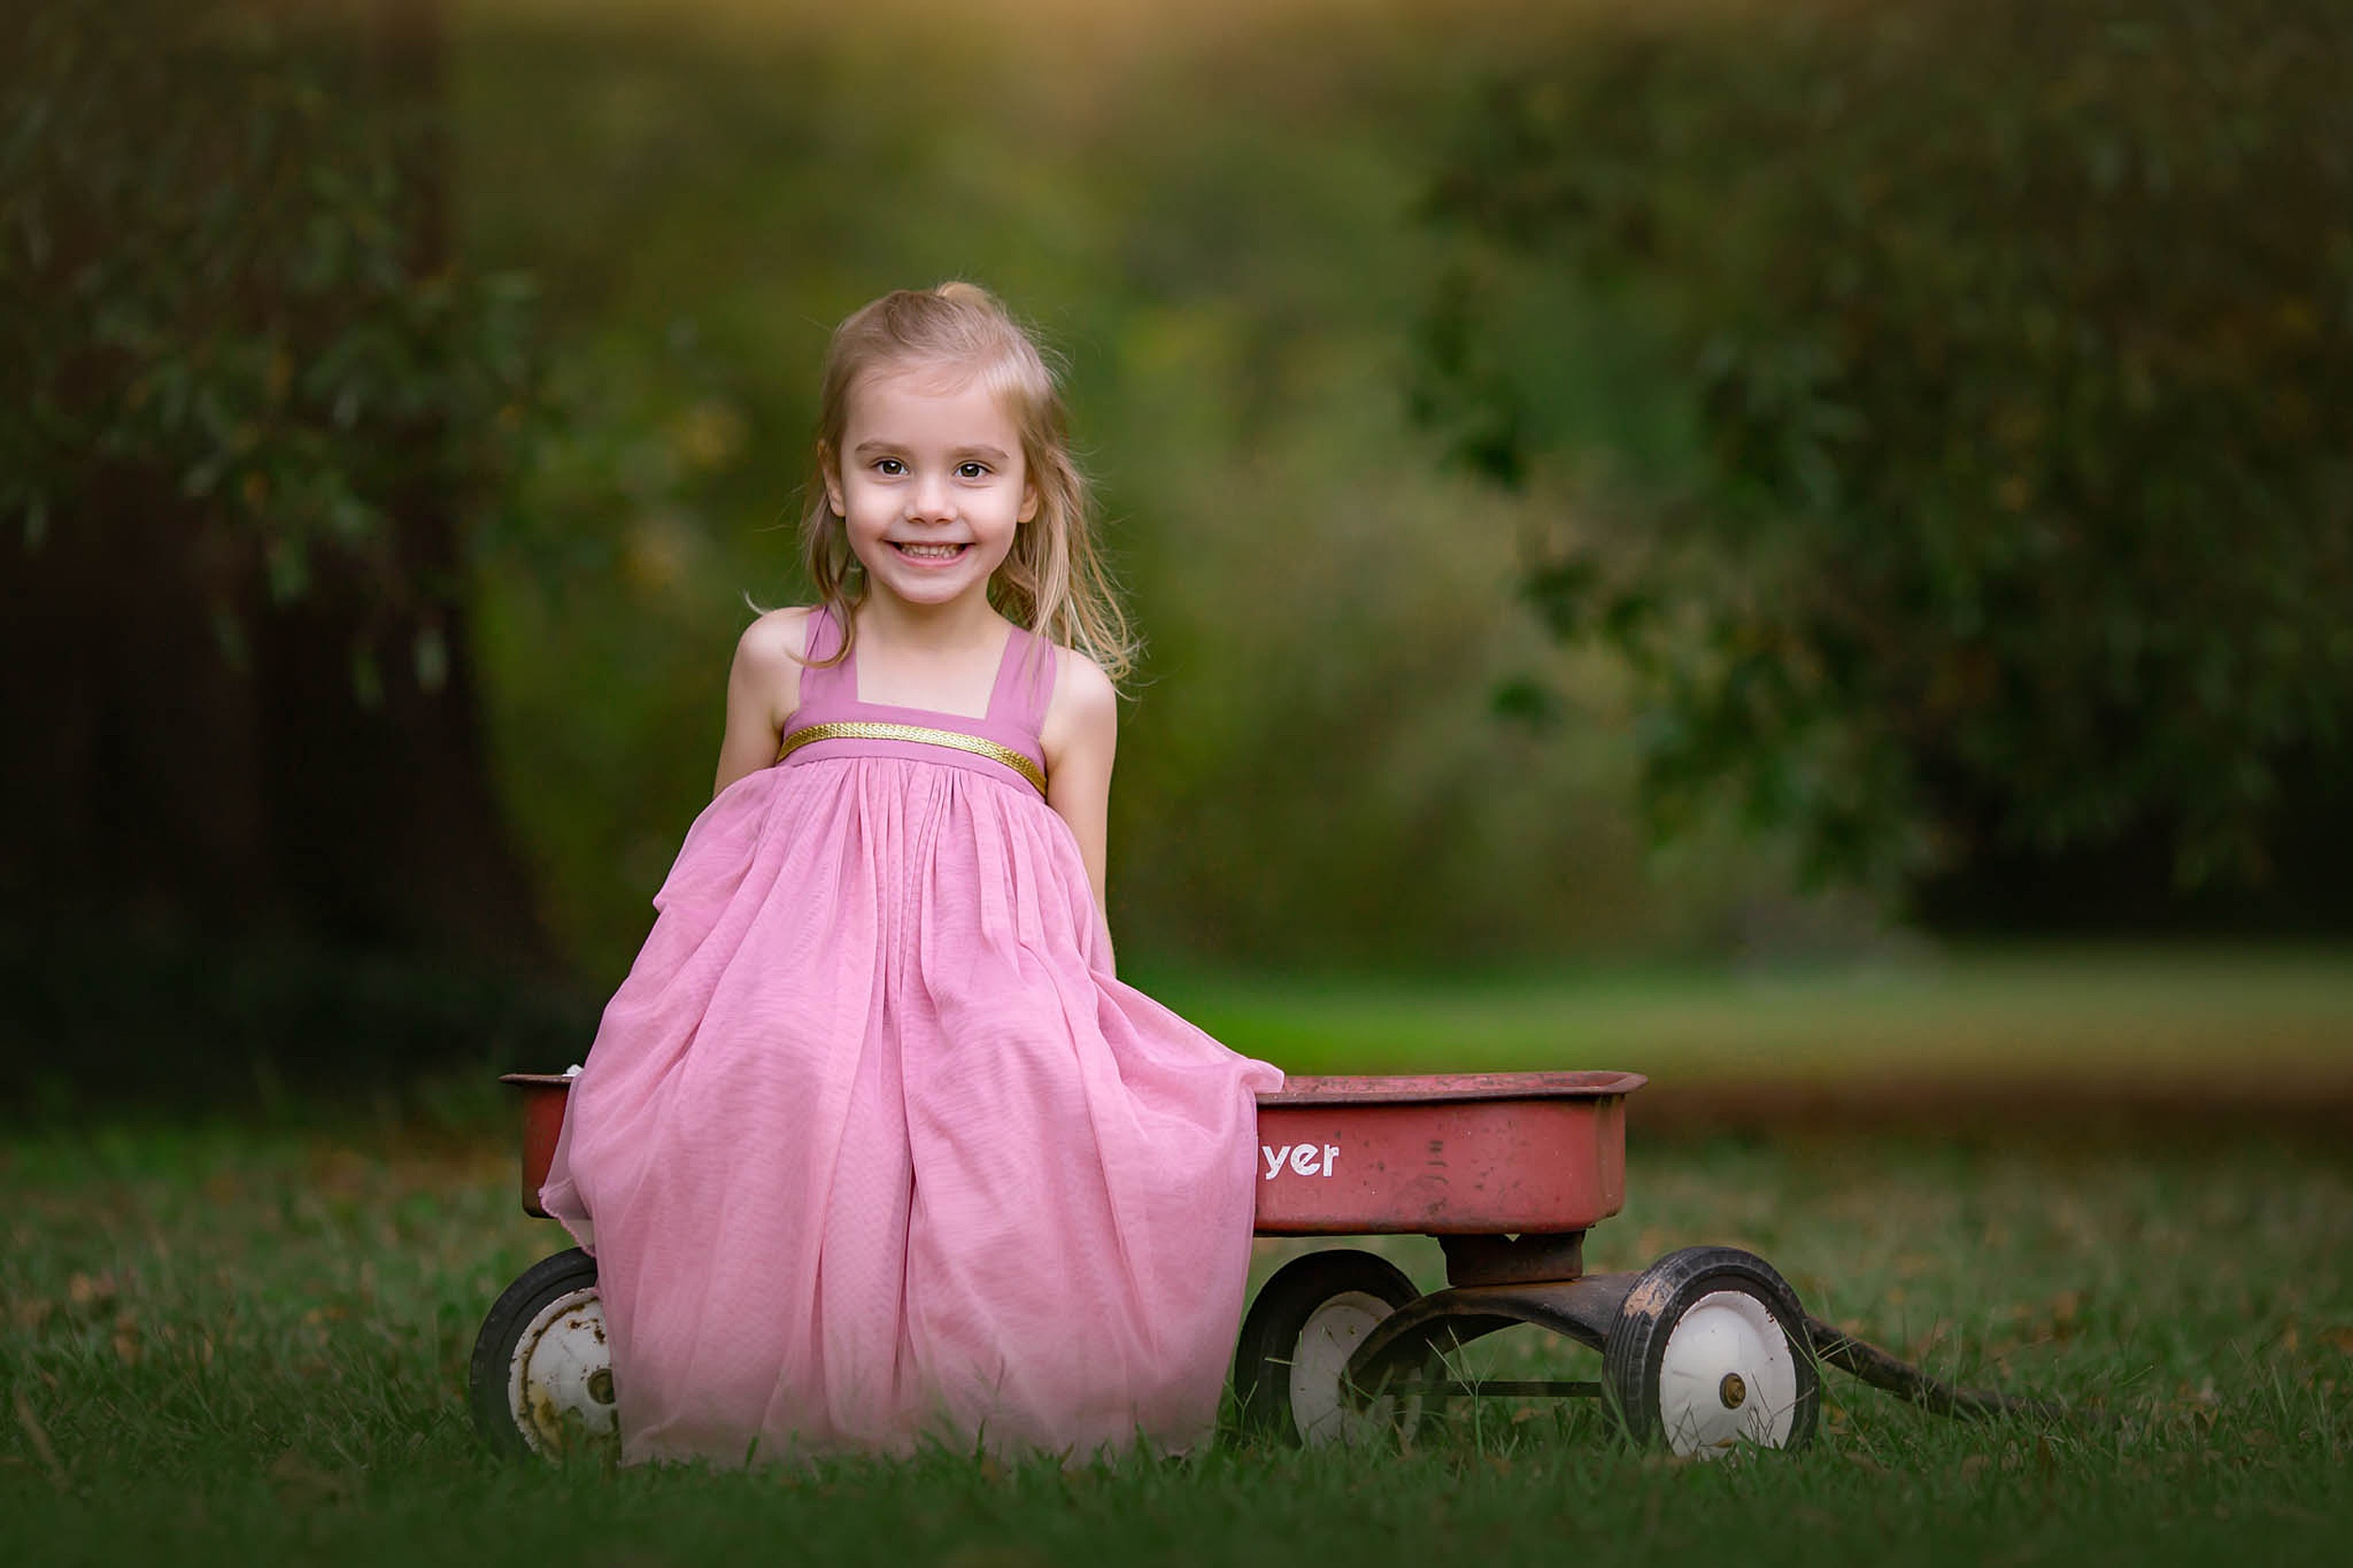 A young girl in a pink dress sits on the edge of a red vintage radio flyer wagon raleigh playgrounds